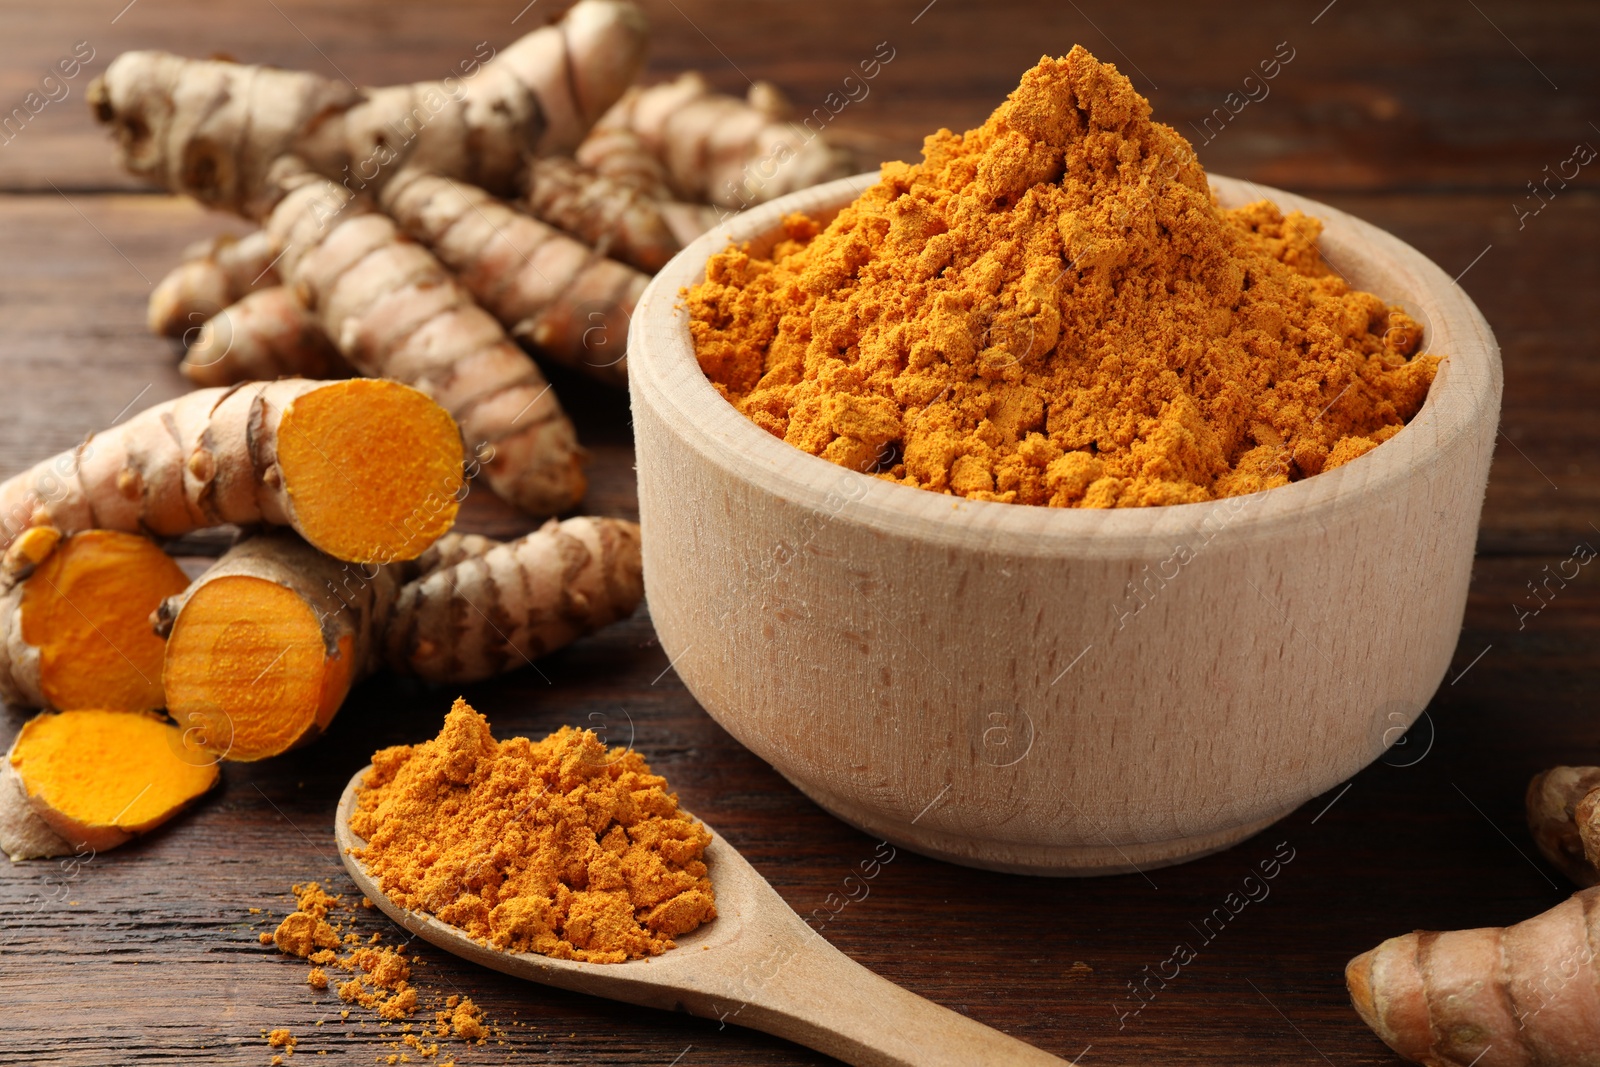 Photo of Aromatic turmeric powder and raw roots on wooden table, closeup